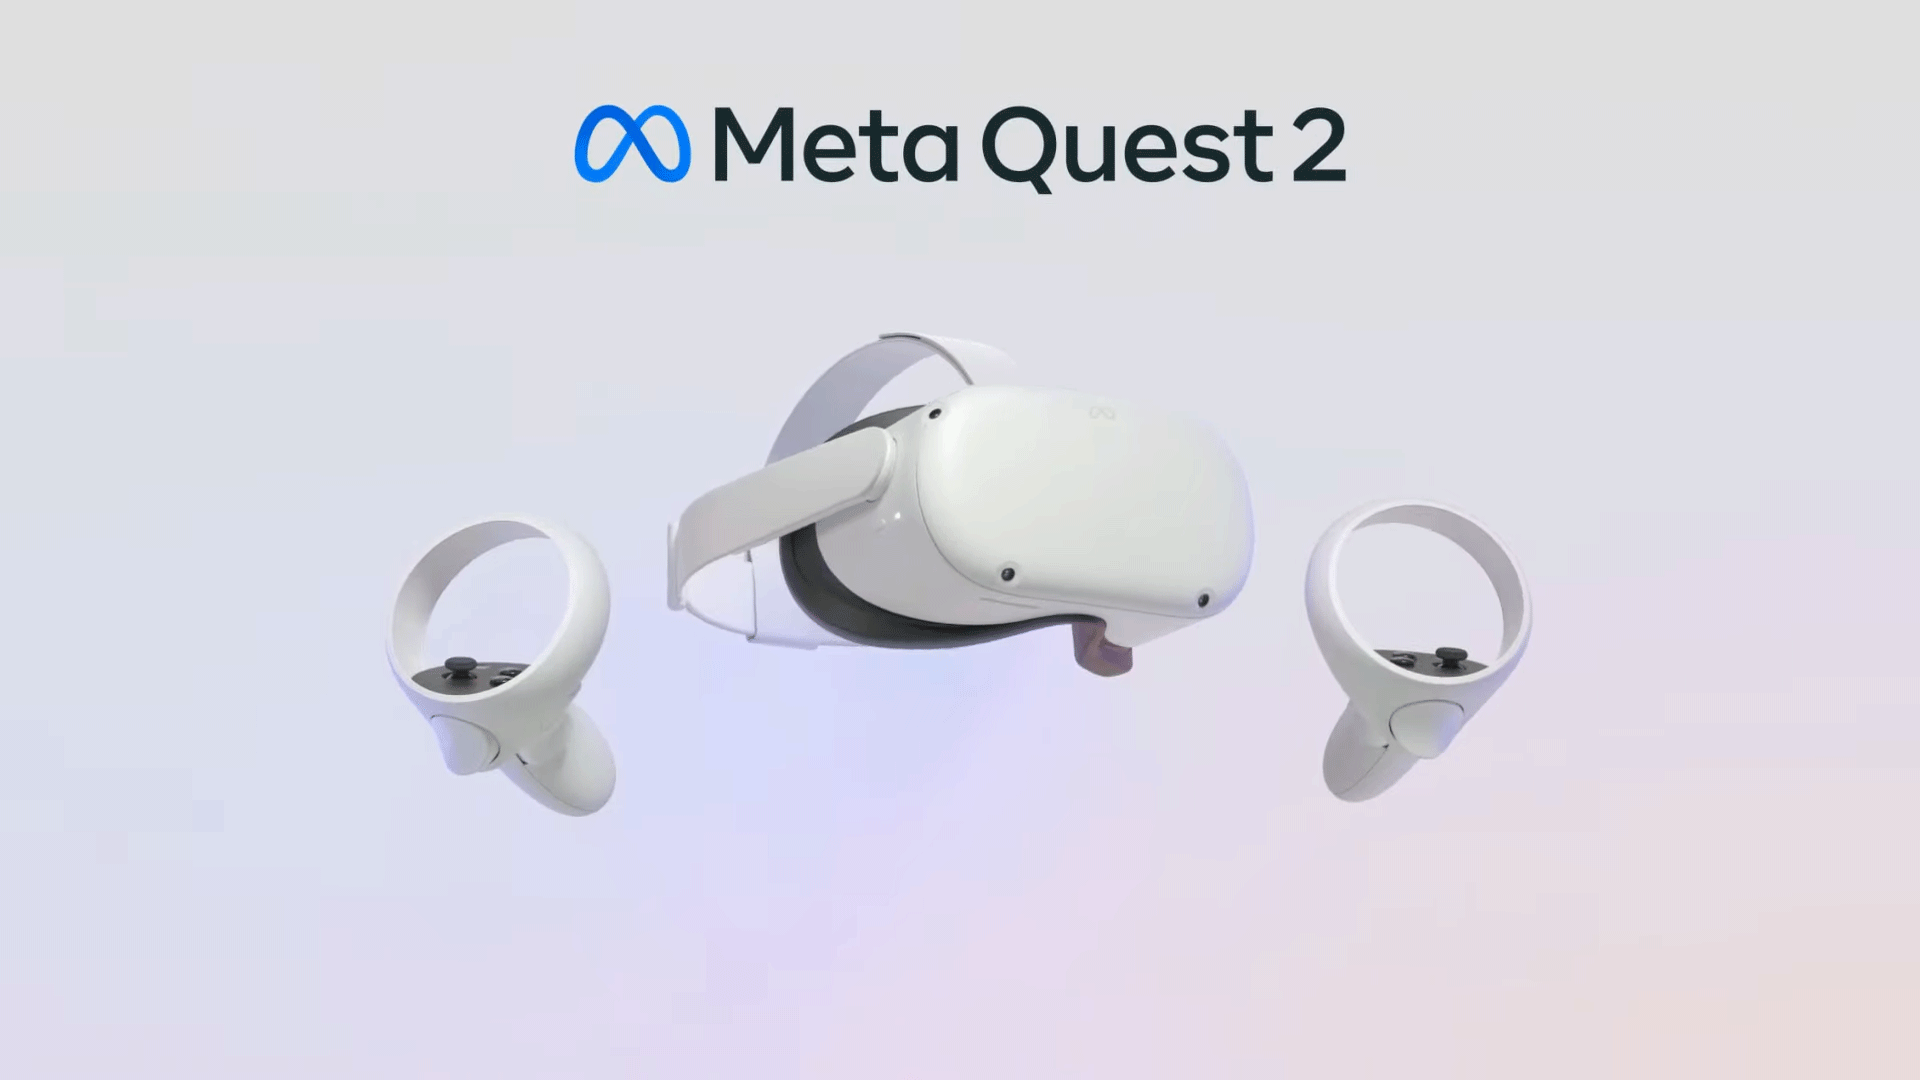 Quest 2 Stock Appears to be Draining as Holiday Sale Drives Purchases | Road to VR